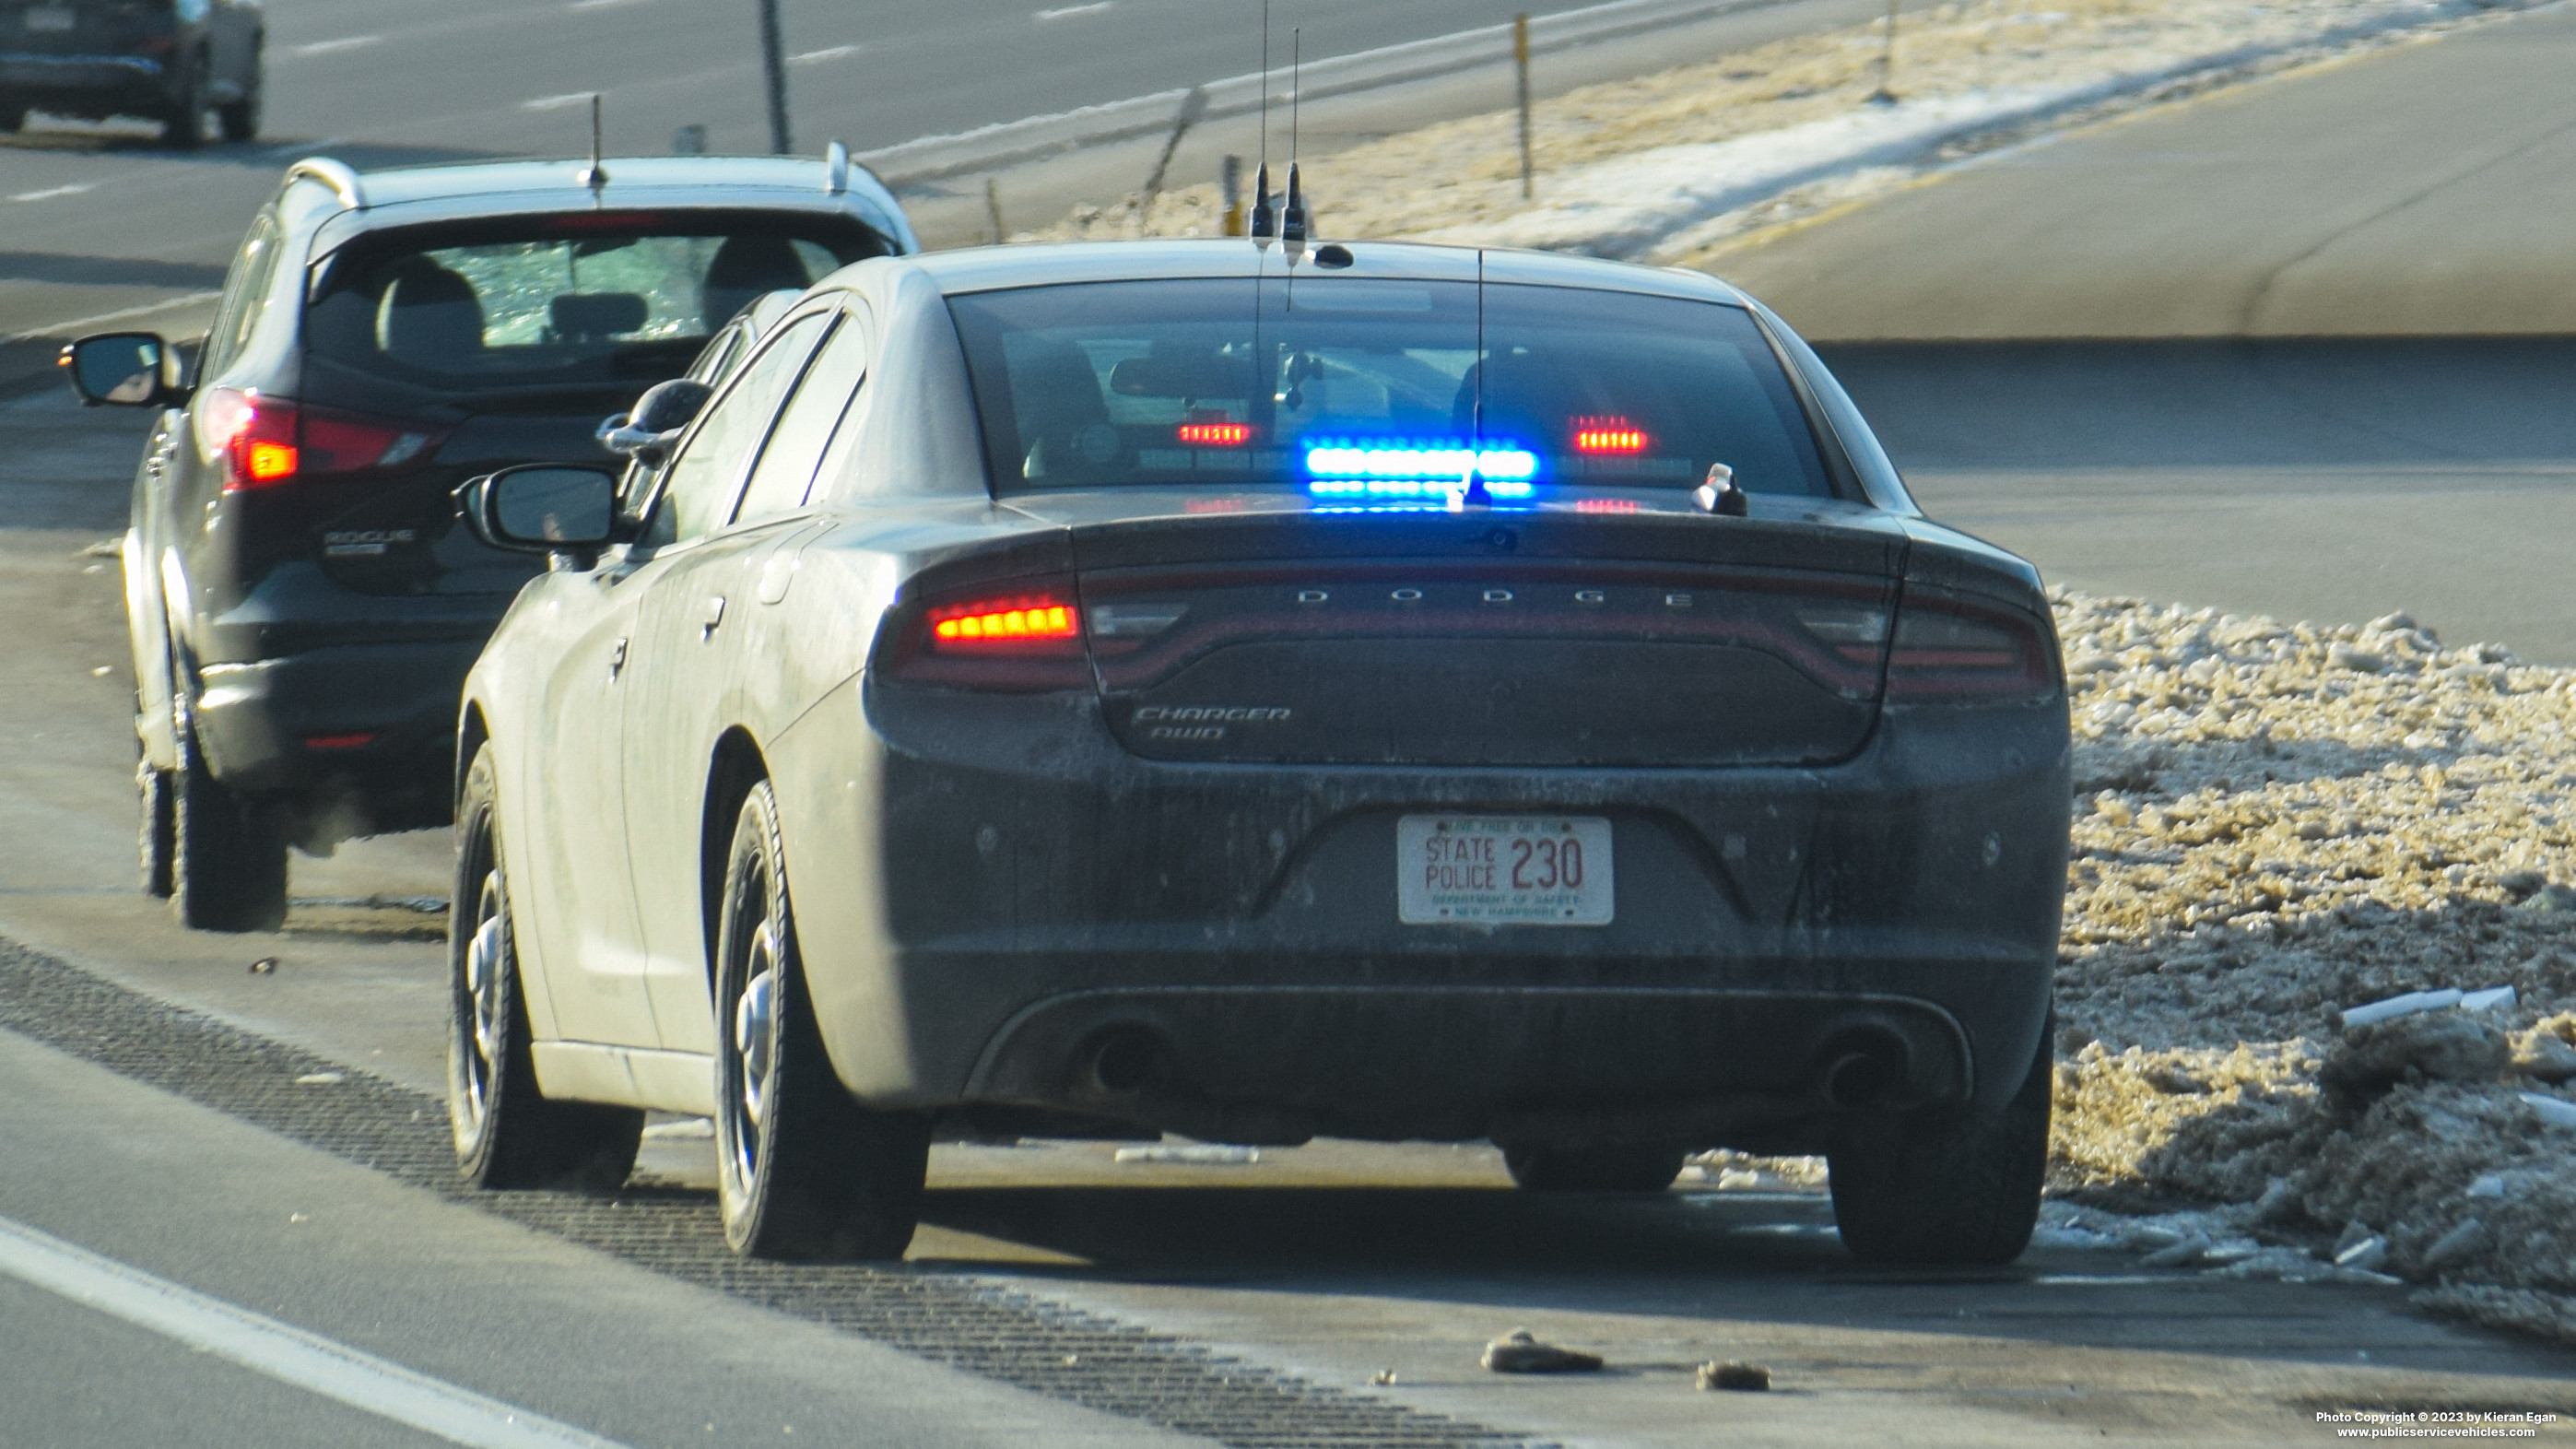 A photo  of New Hampshire State Police
            Cruiser 230, a 2017-2020 Dodge Charger             taken by Kieran Egan